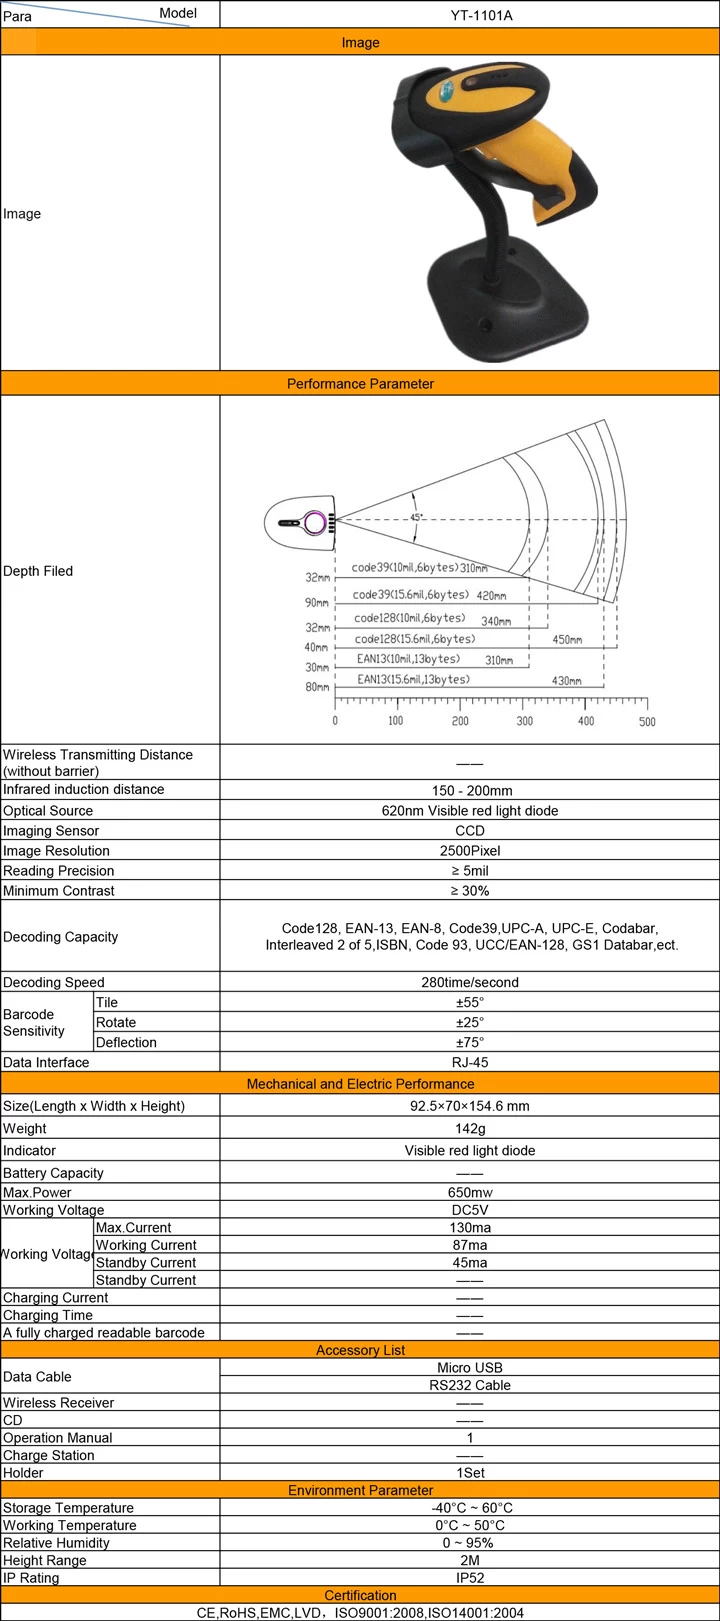 specification about YT-1101A